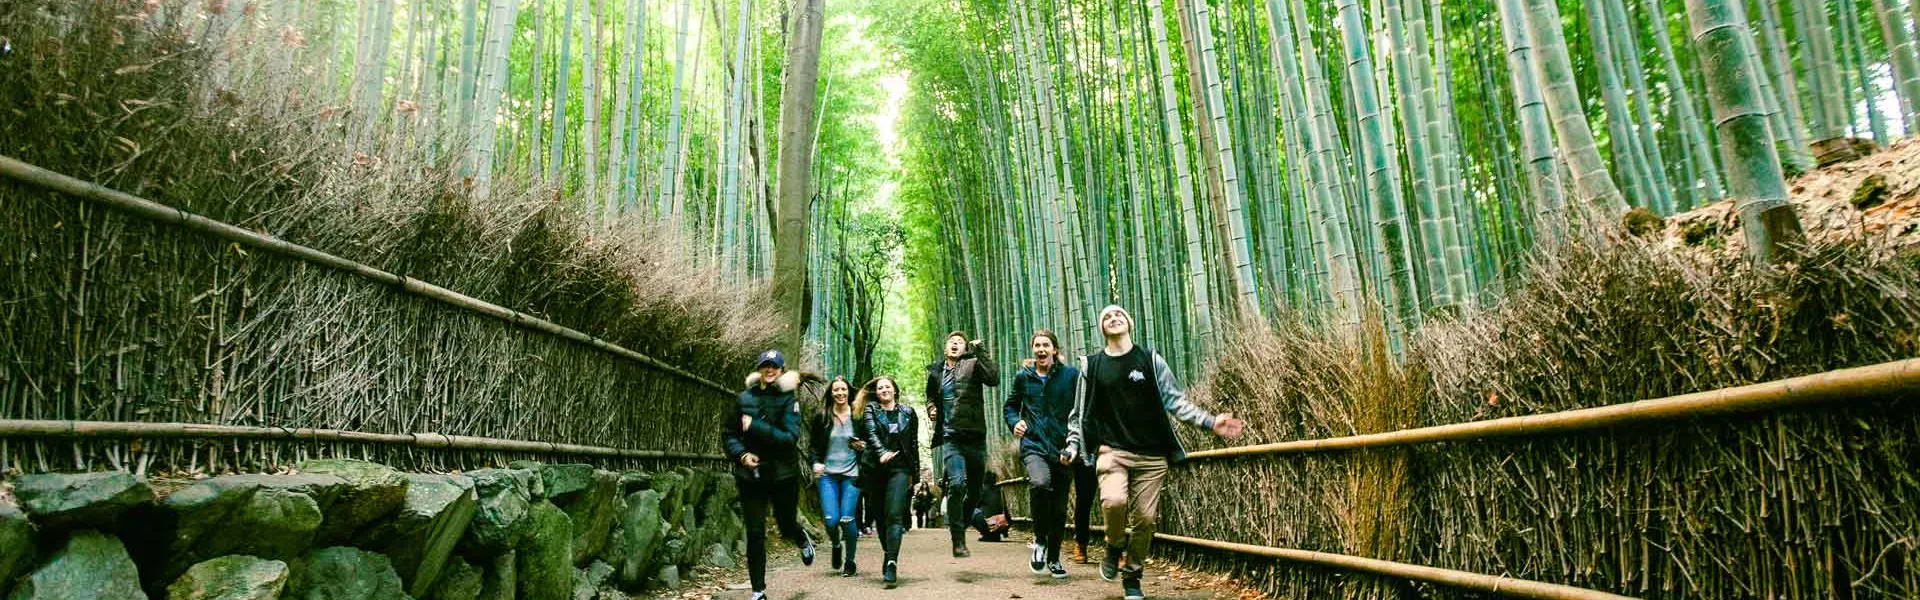 Group Walking Through Forest In Japan